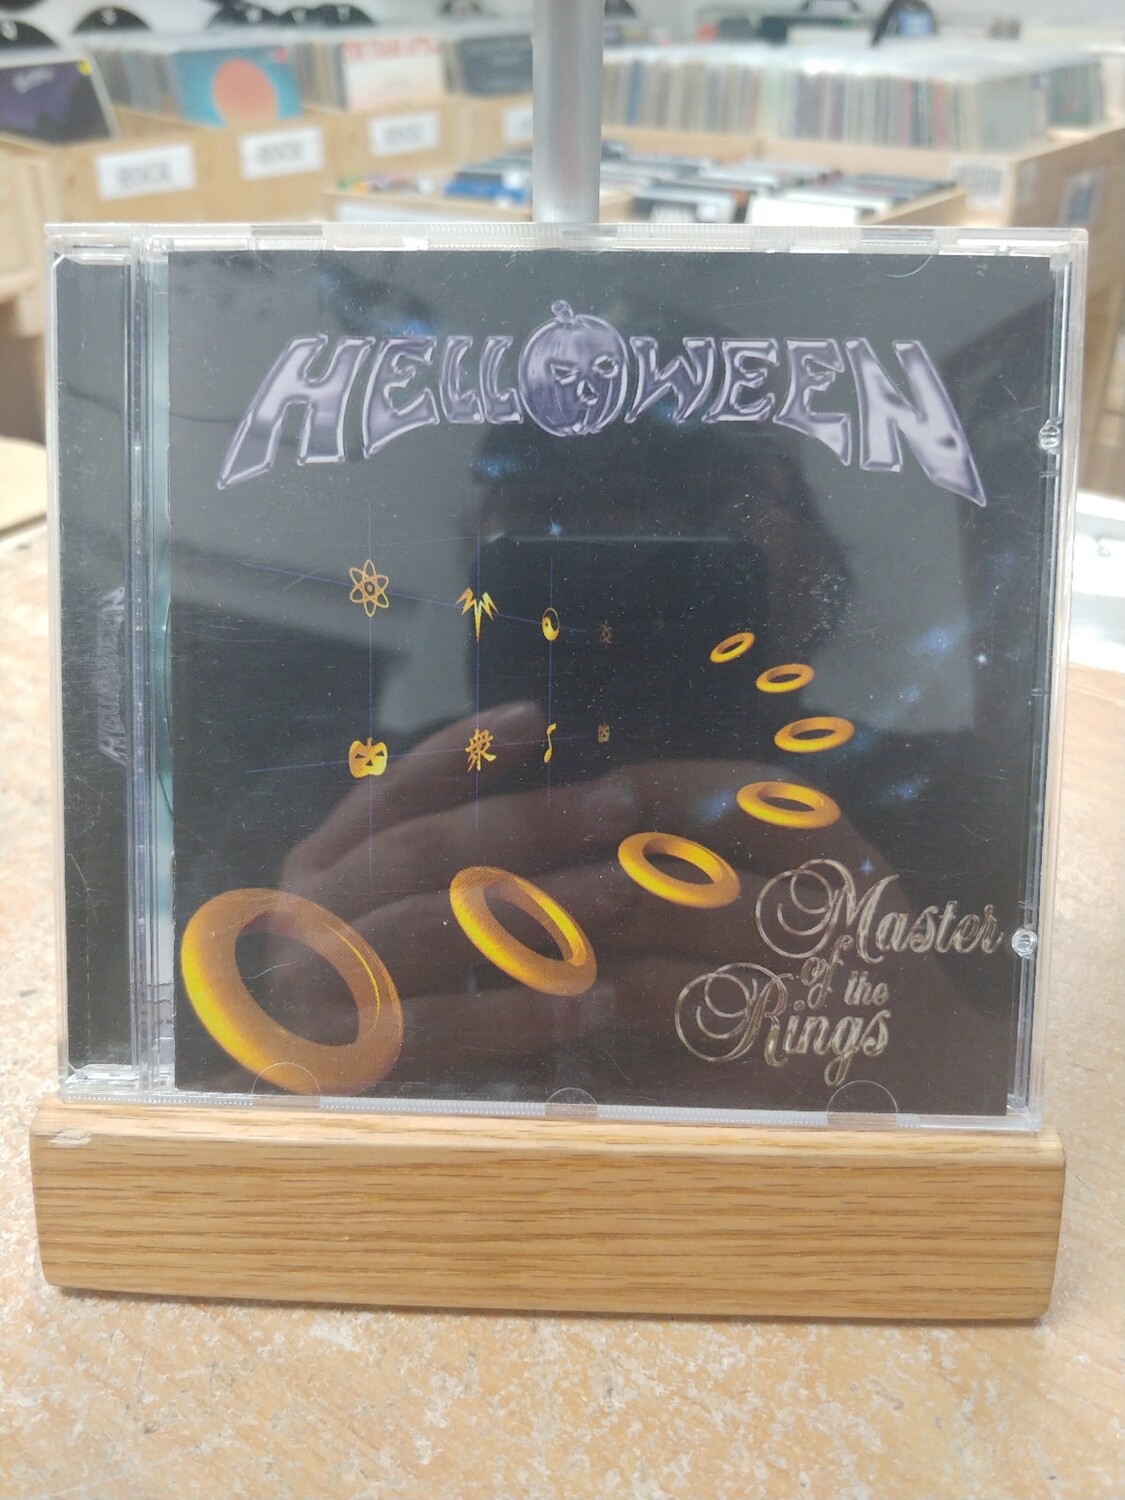 Helloween - Master of the rings (CD)